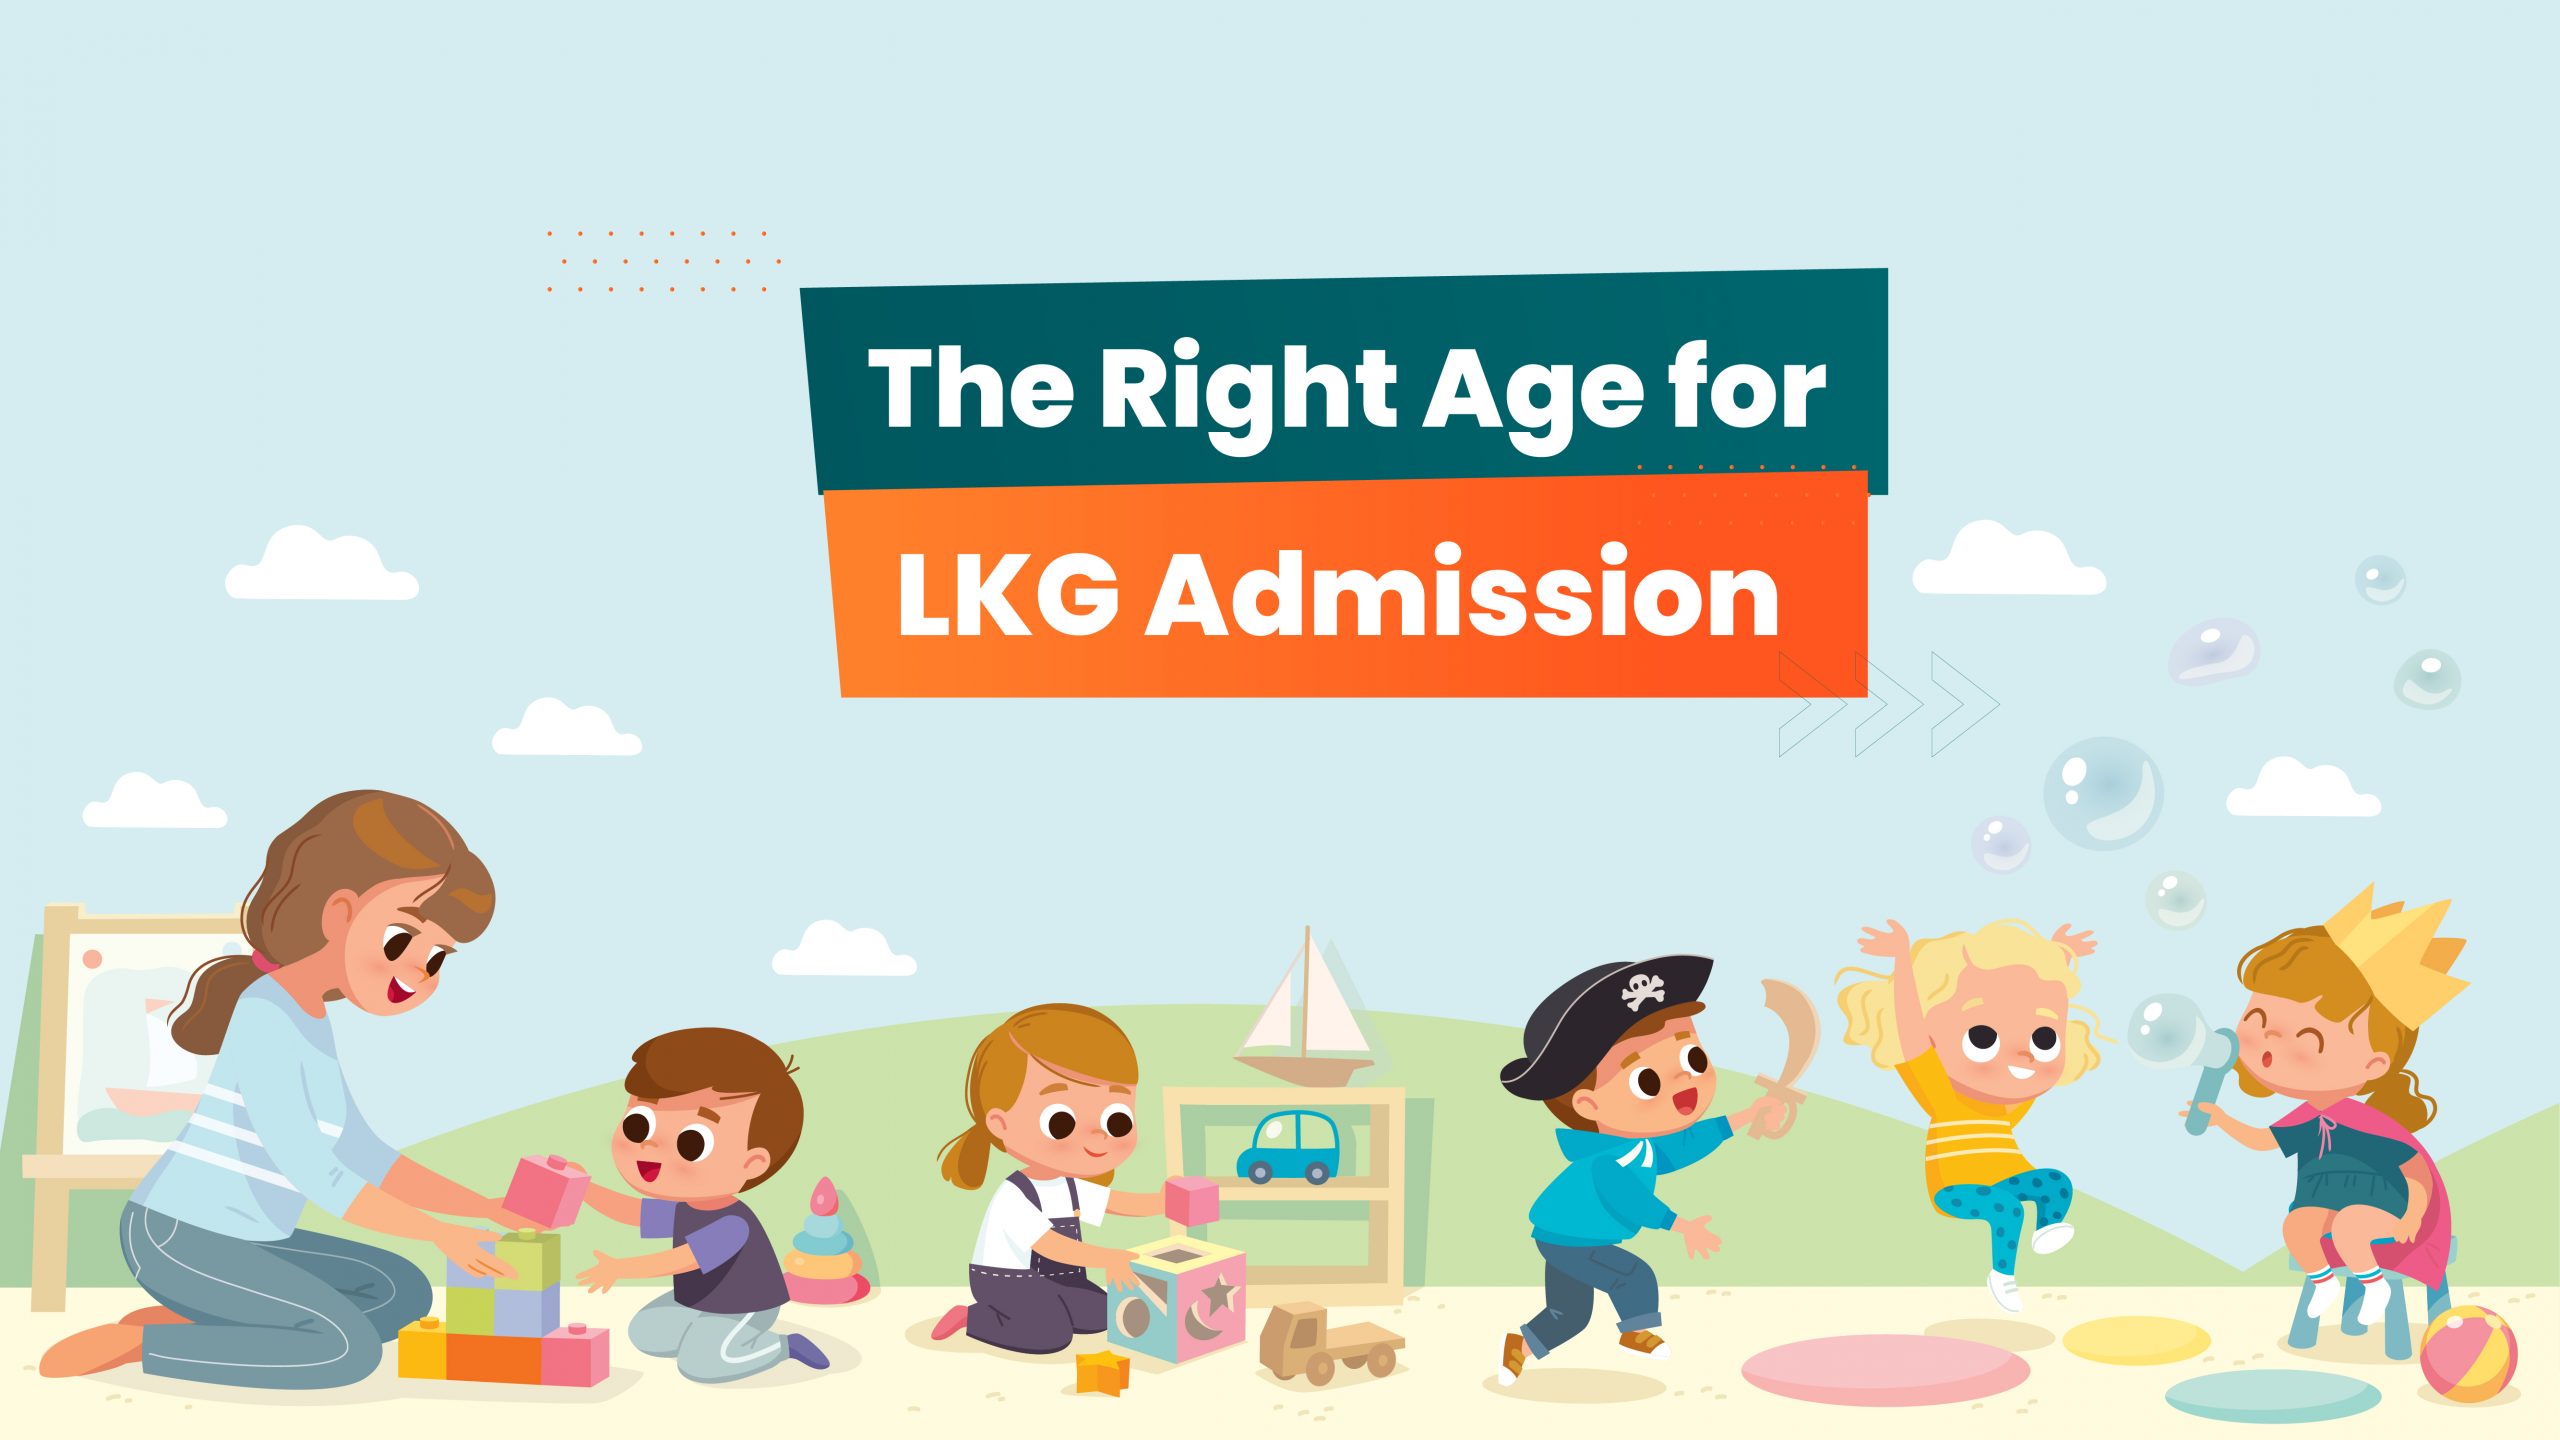 The Right Age for LKG Admission